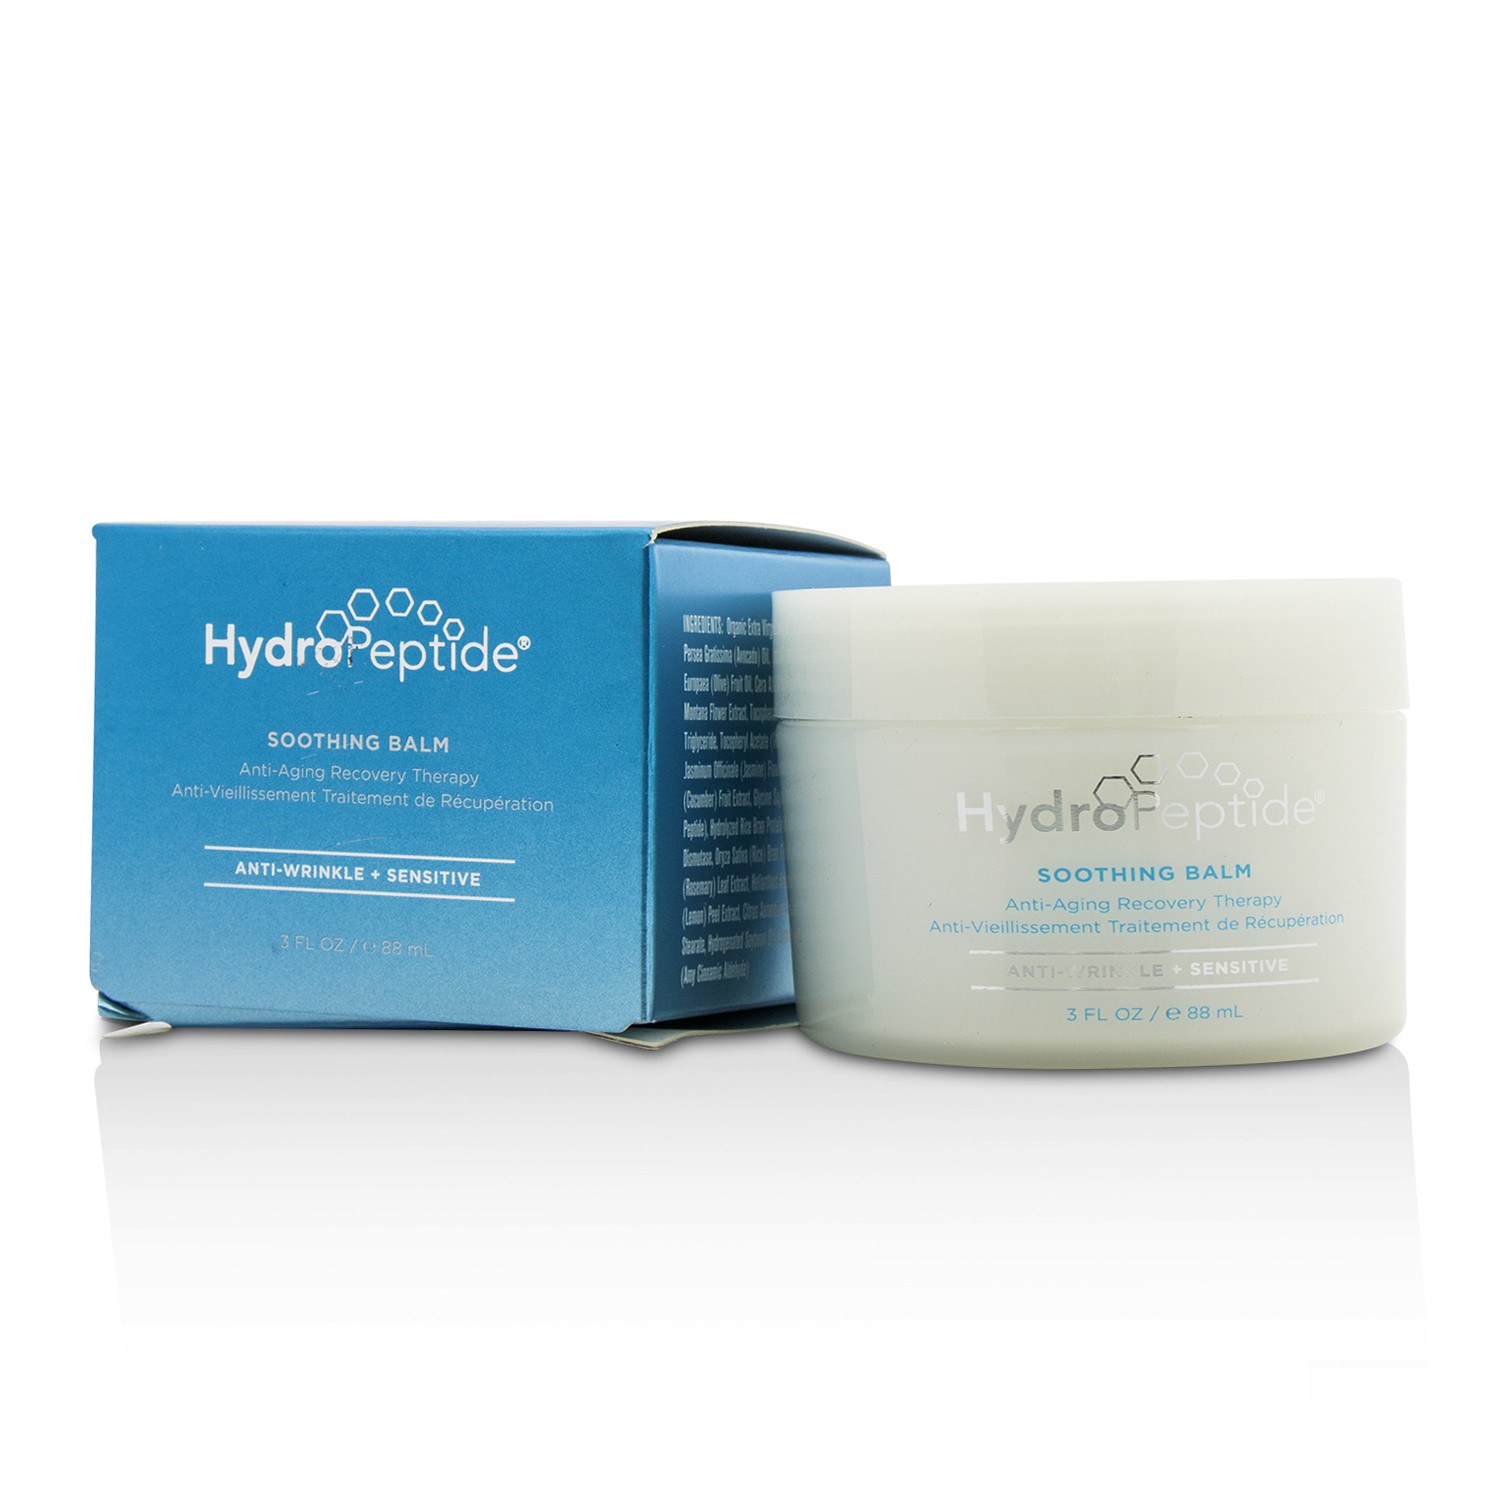 Soothing Balm: Anti-Aging Recovery Therapy - All Skin Types HydroPeptide Image